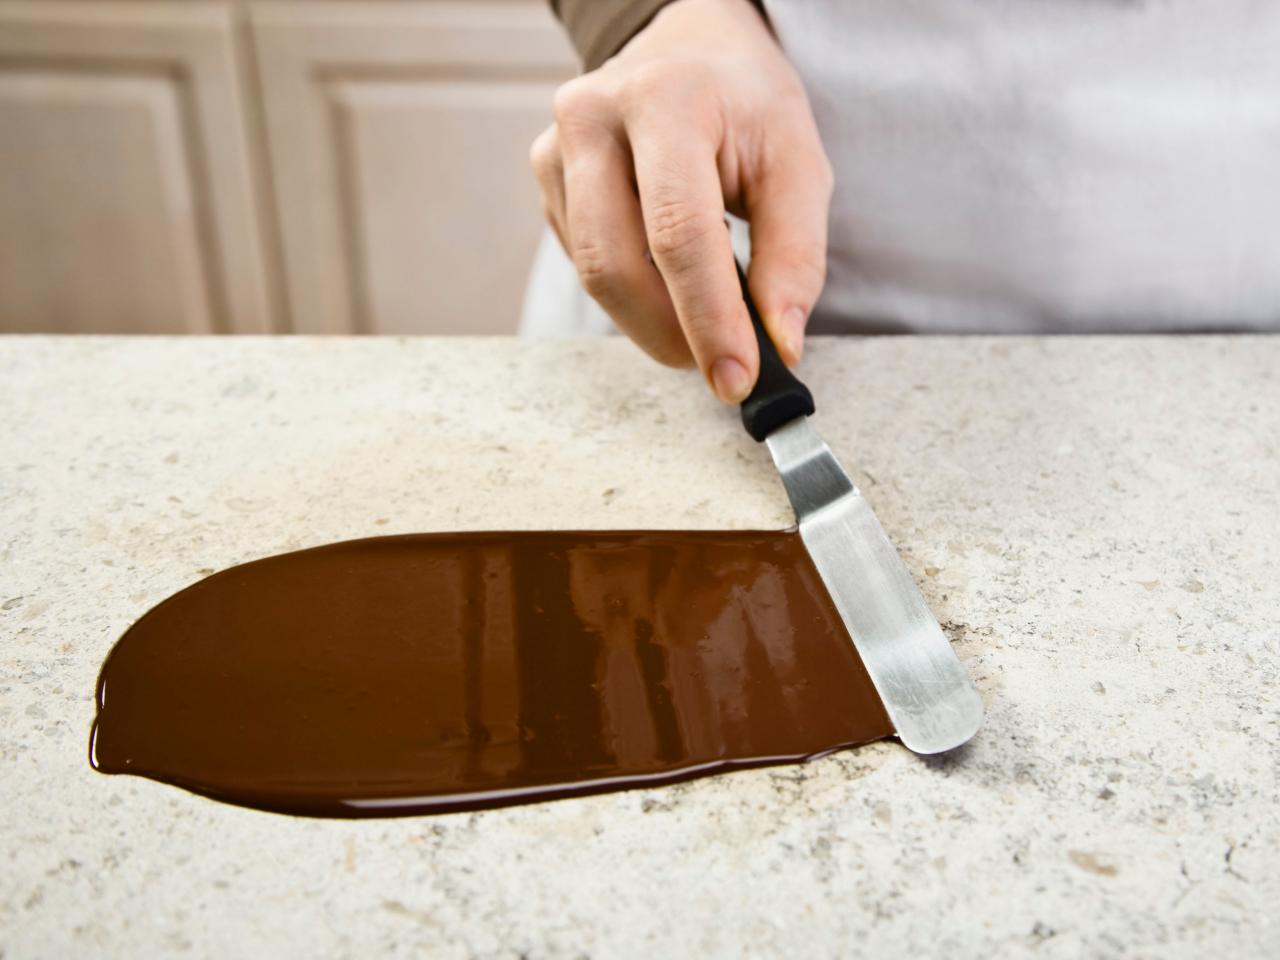 Your (Thermometer-less!) Guide to Tempering Chocolate - Parade